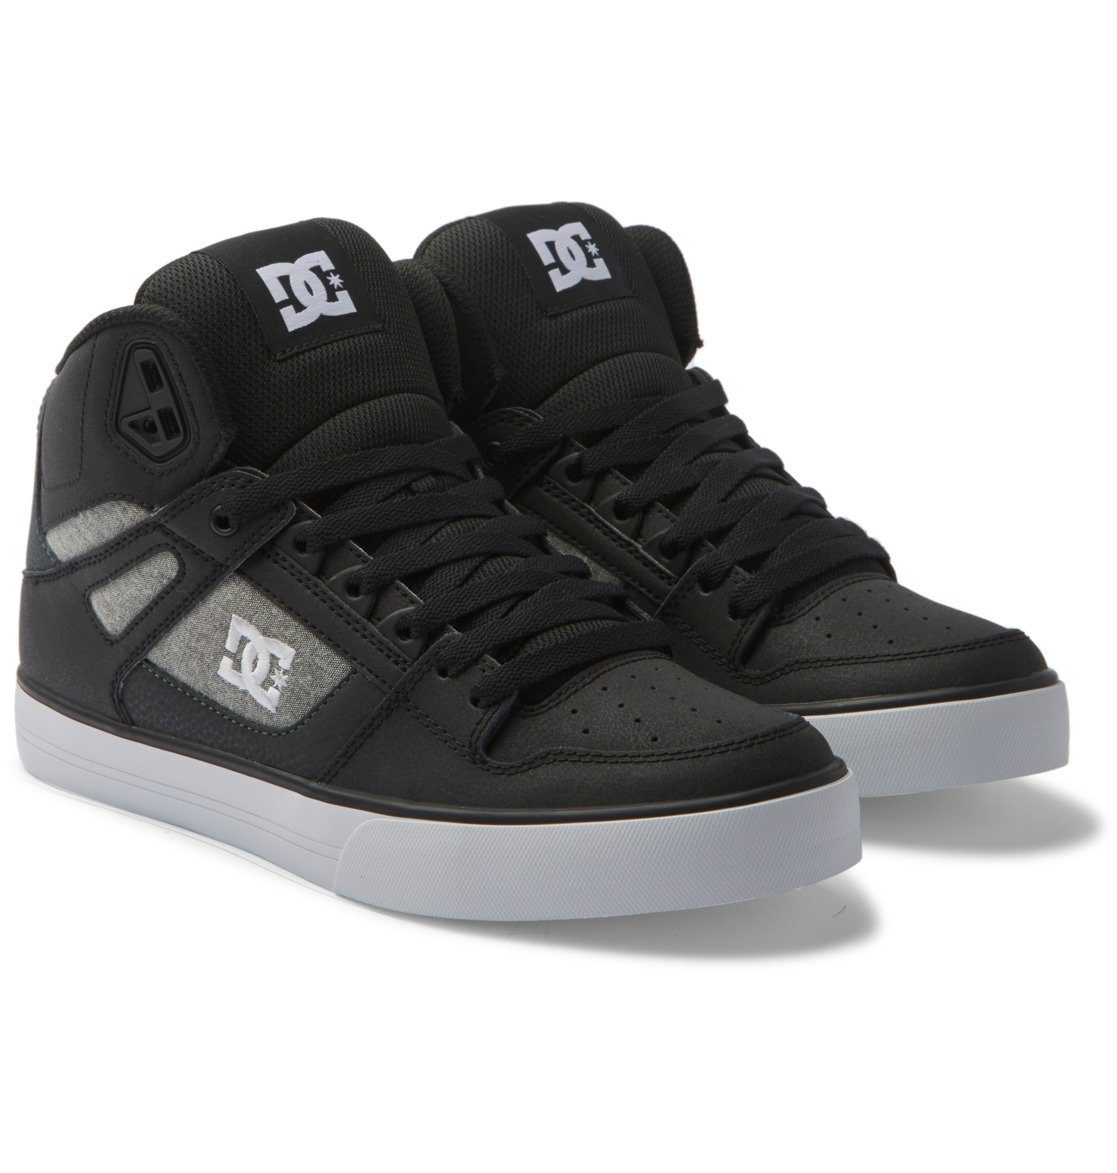 DC Shoes Pure High-Top Sneaker Black/White/Armor